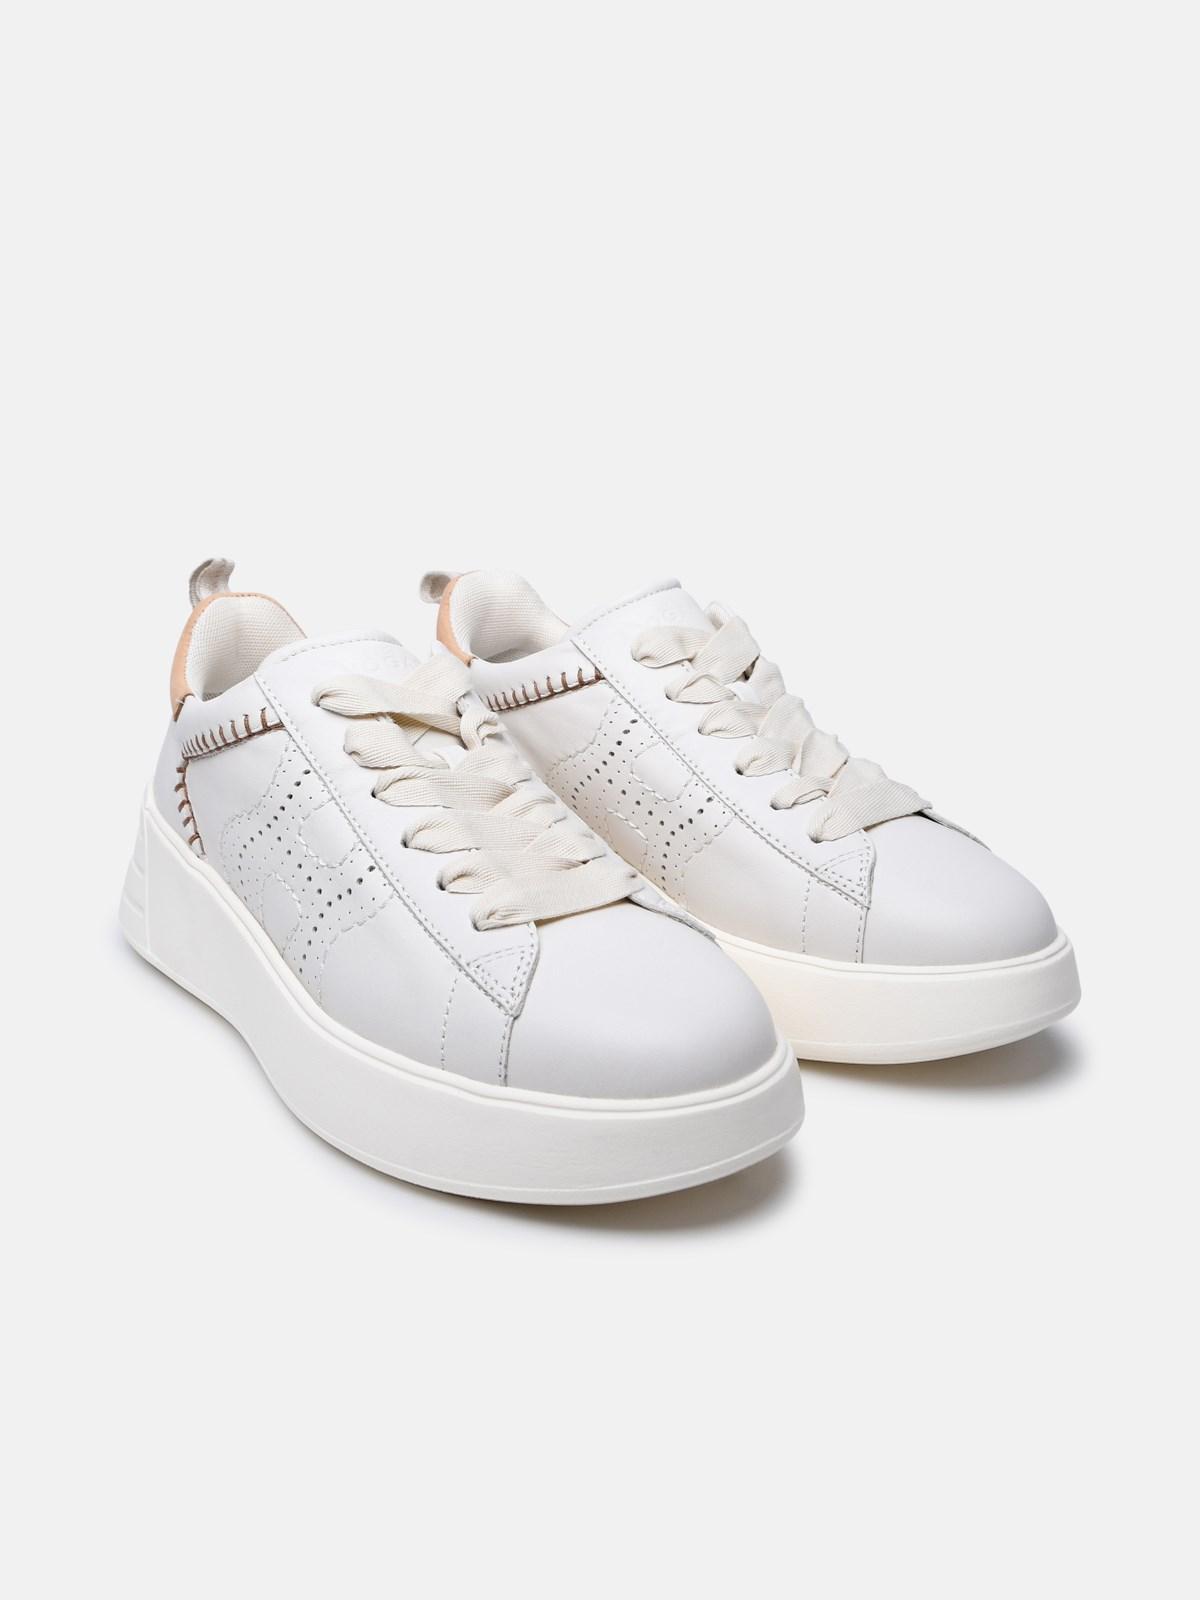 Hogan White Leather Sneakers | Lyst